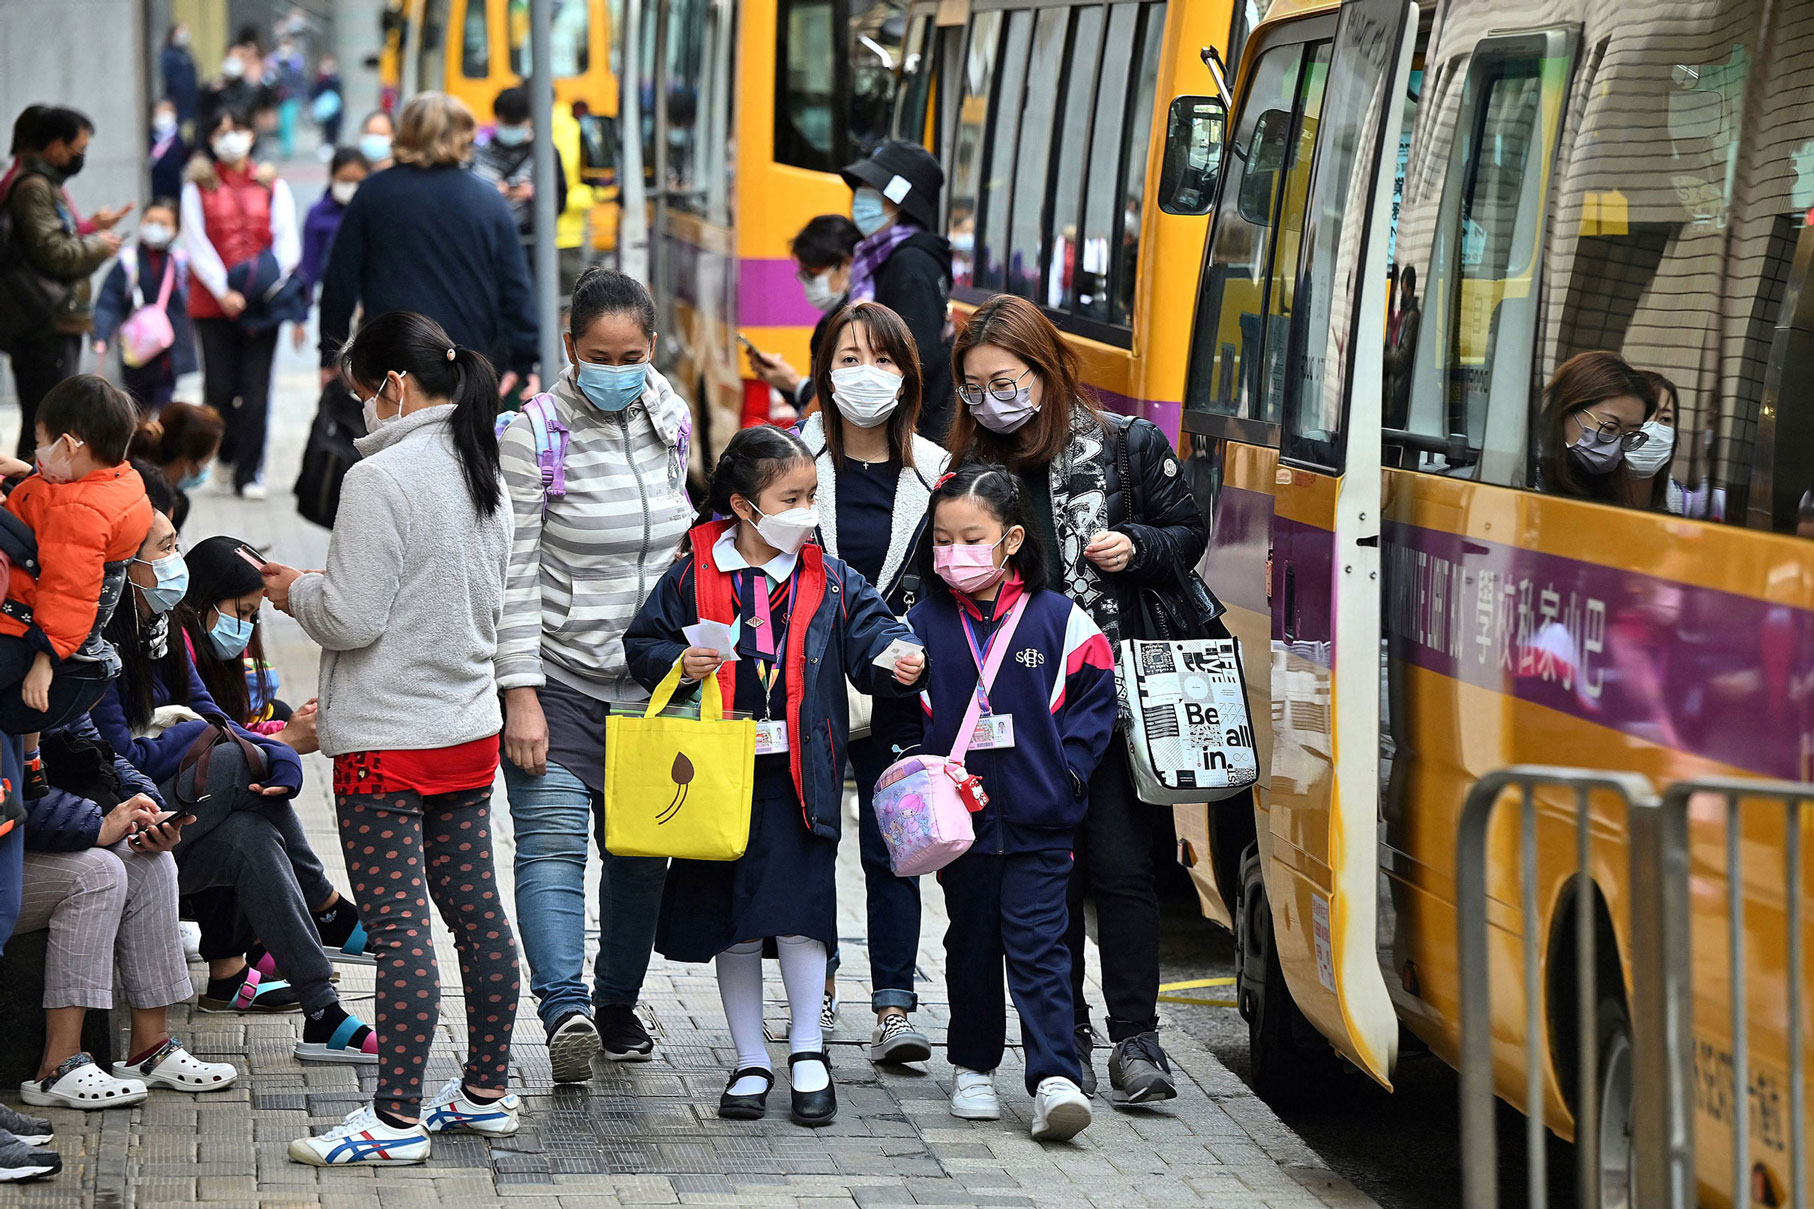 Children are escorted from school in Hong Kong on January 11, as the city announced the suspension of all kindergarten and primary schools until after the Lunar New Year in early February following an Omicron variant coronavirus outbreak.